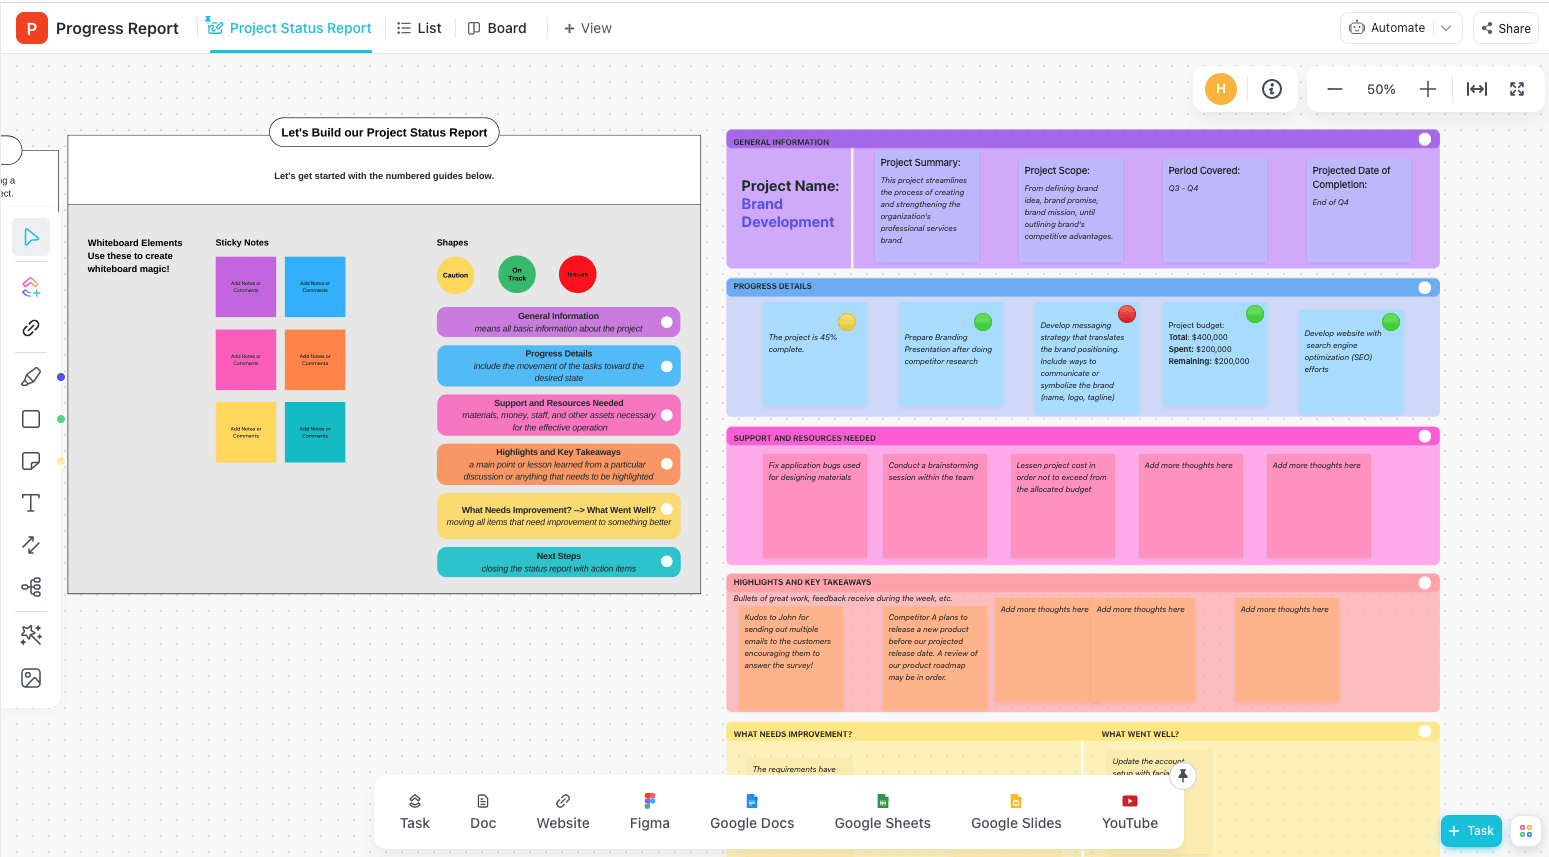 Project Status Report Template by ClickUp